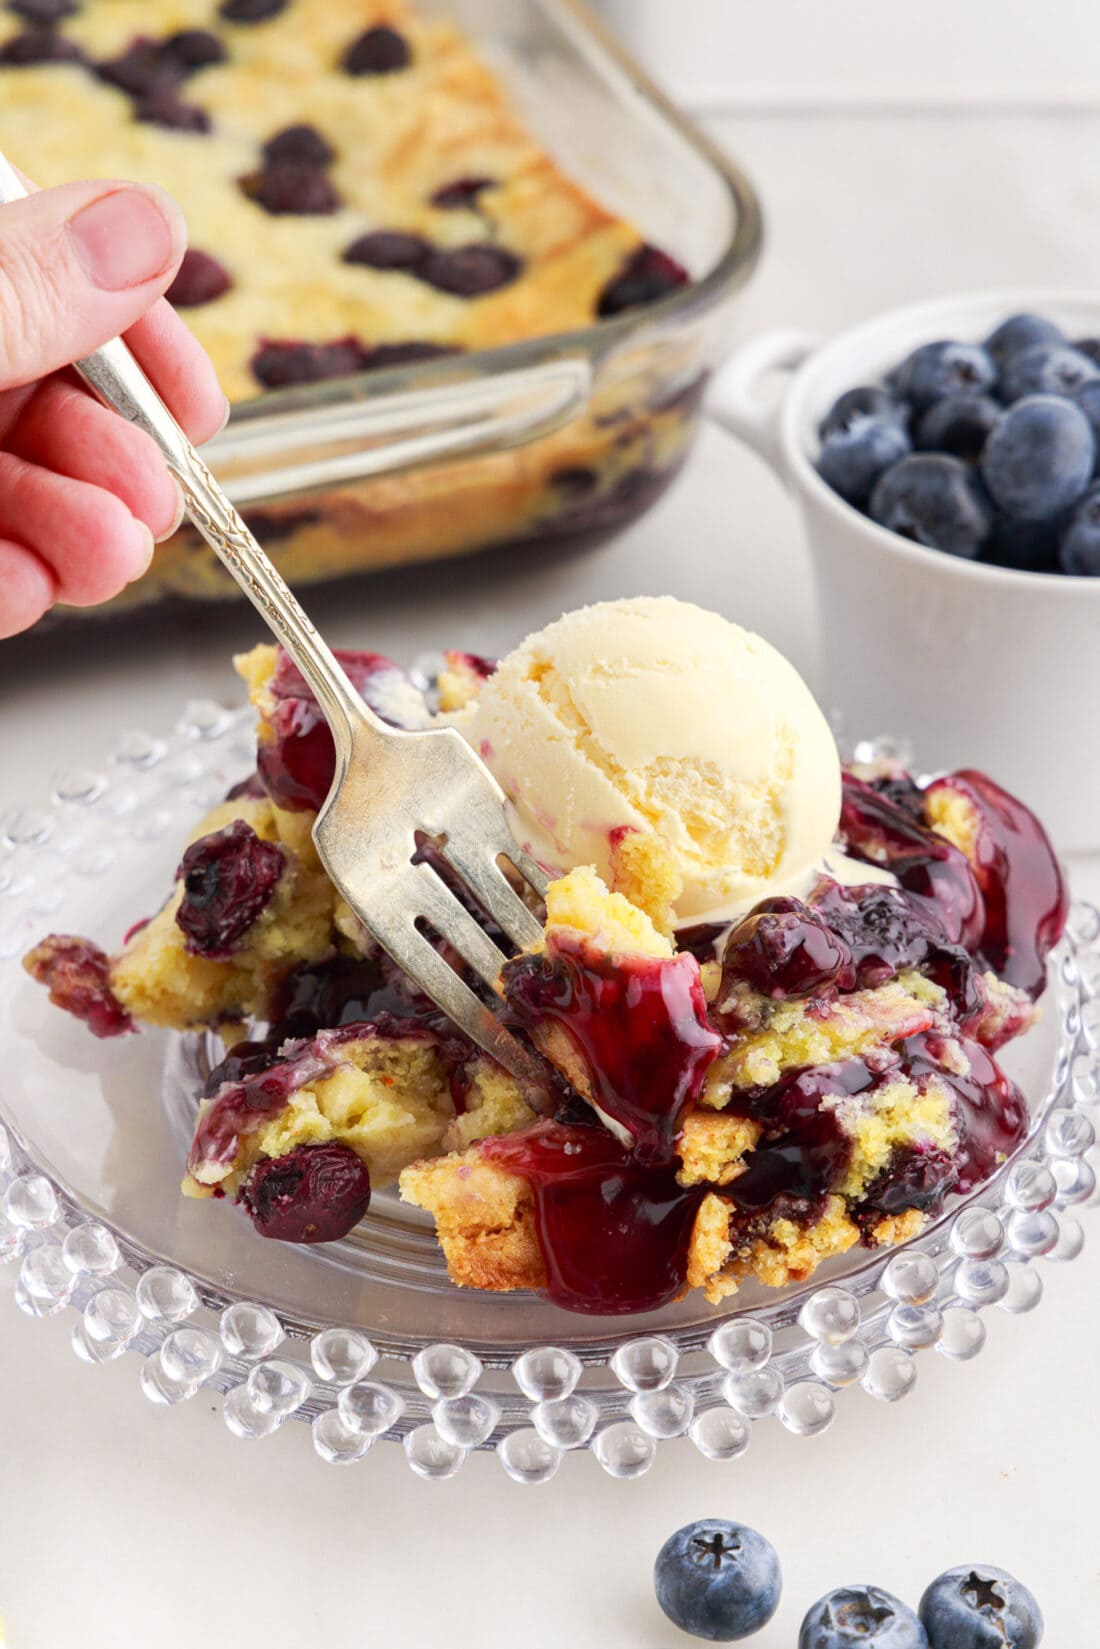 Fork dipping into a serving of Blueberry Dump Cake on a plate